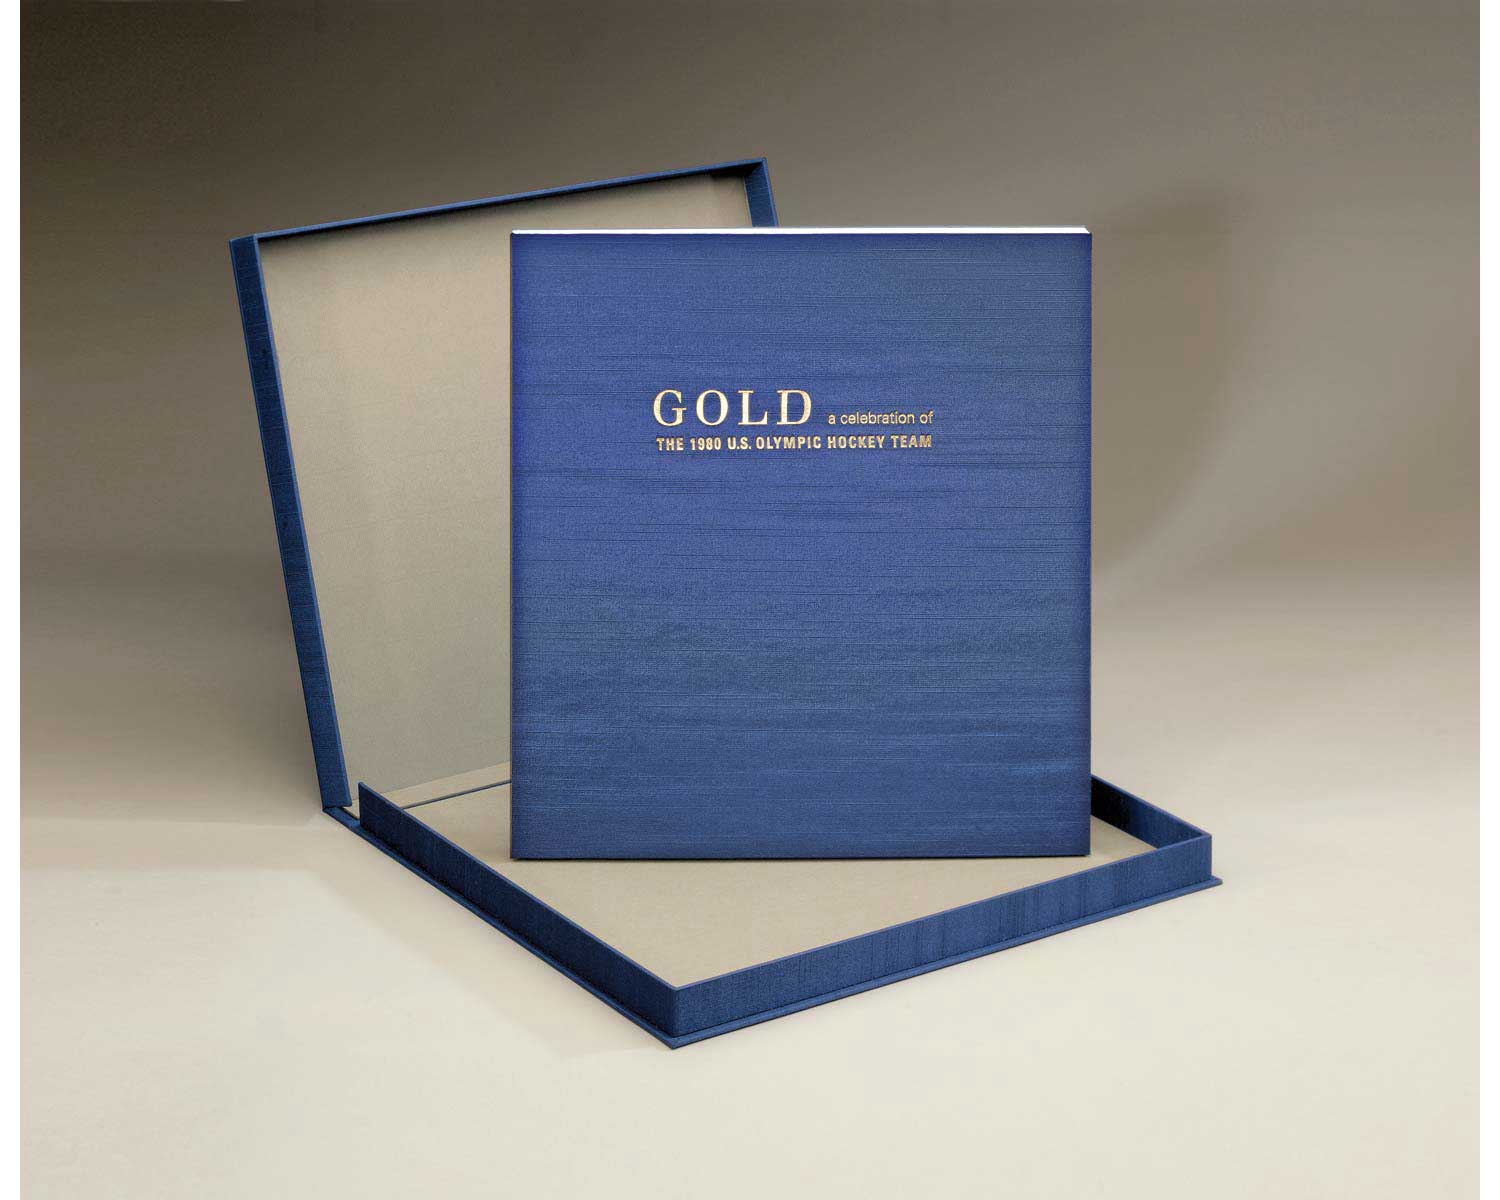 Gold: A Celebration of the 1980 US Olympic Hockey Team